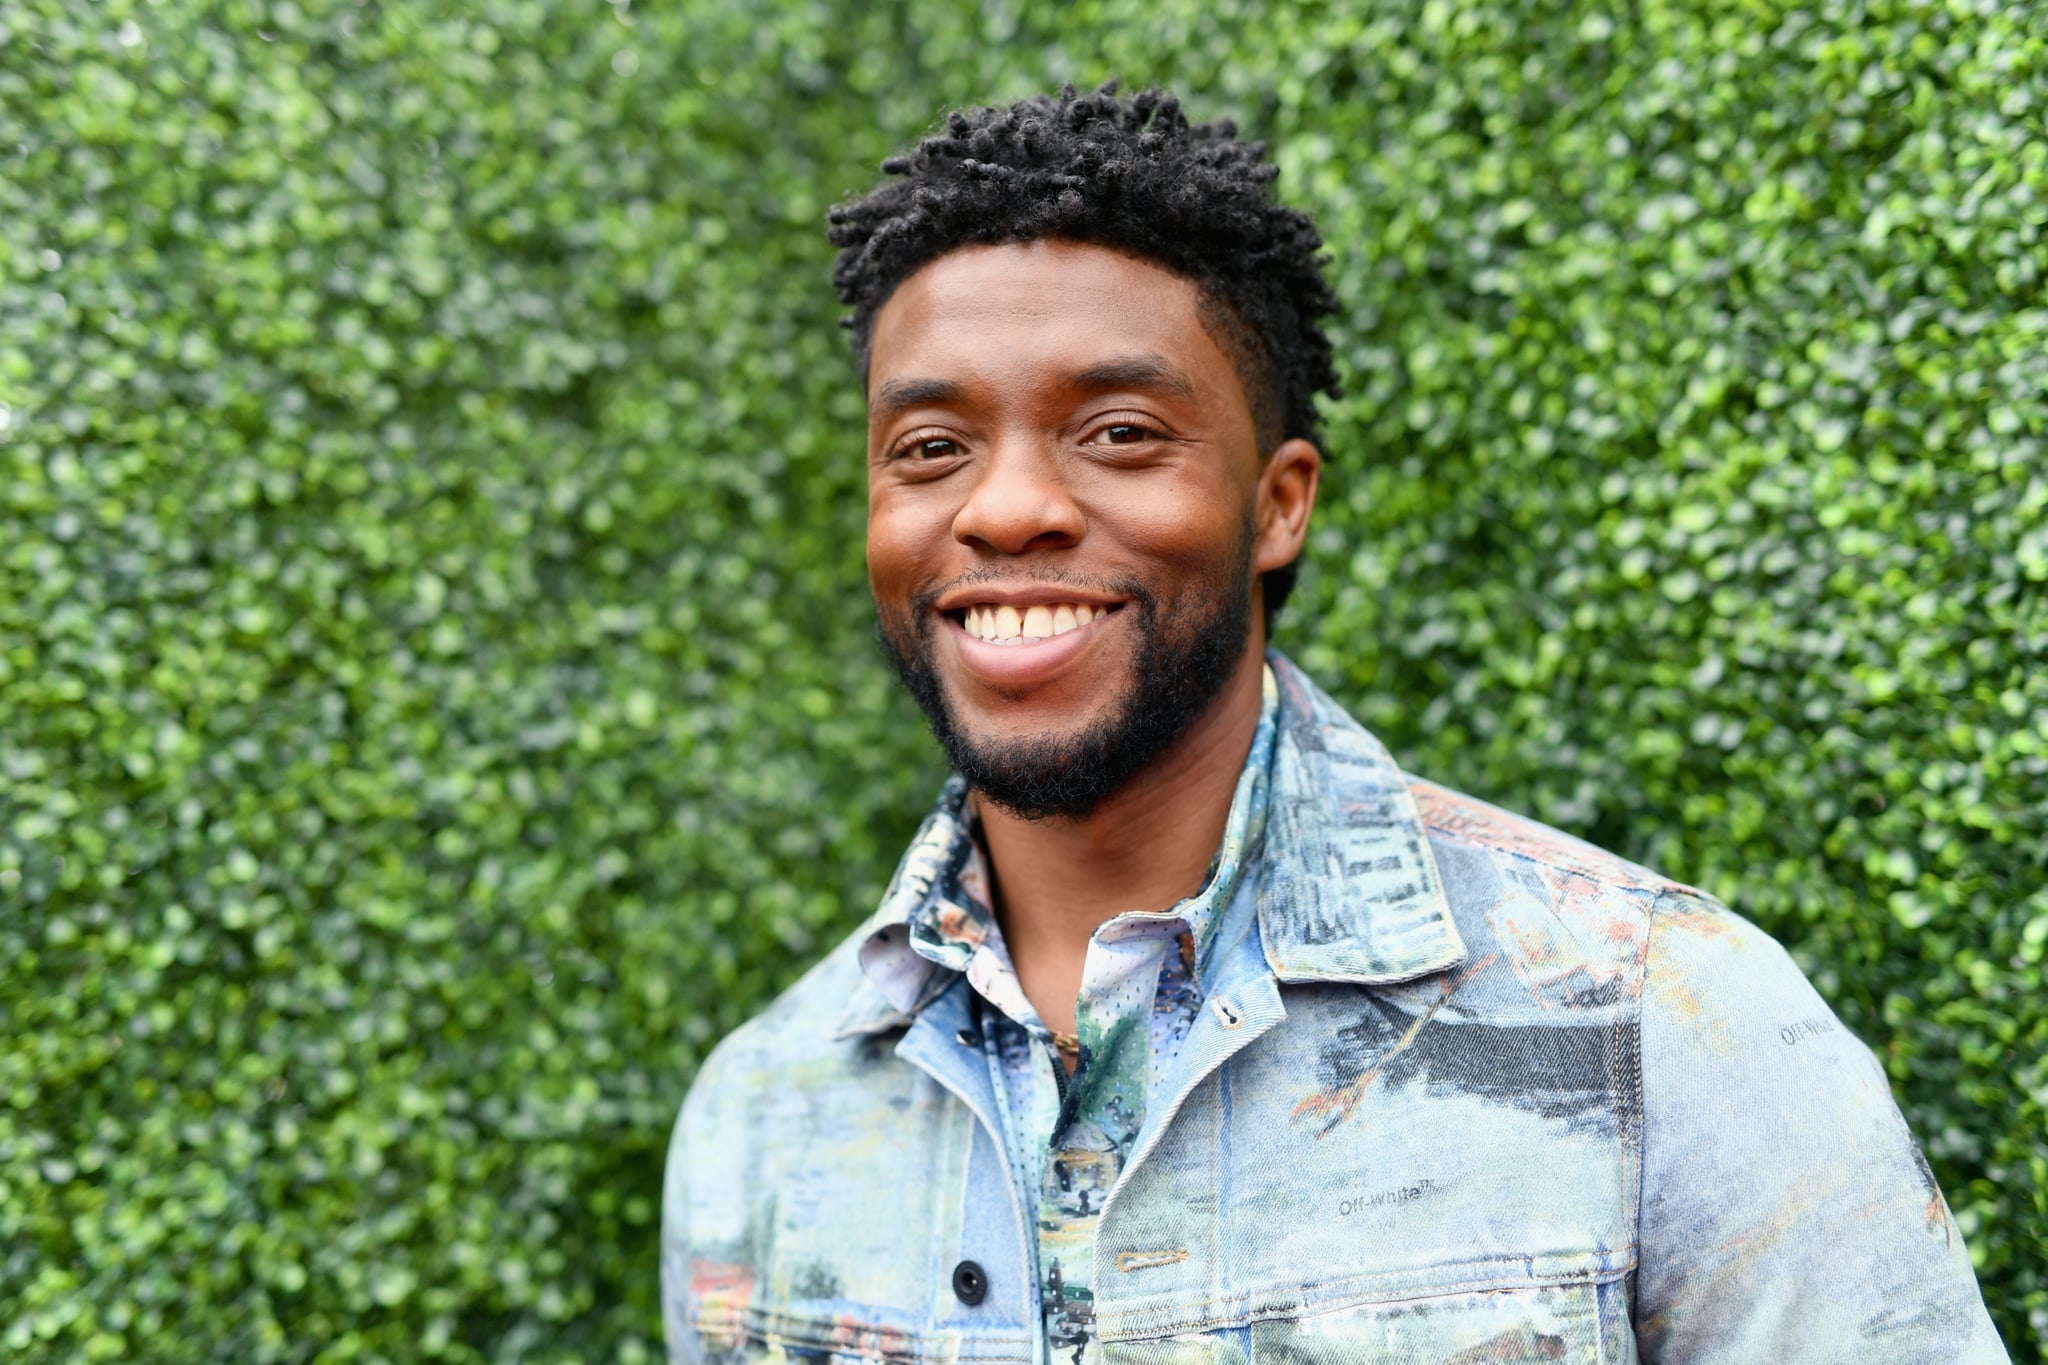 SANTA MONICA, CA - JUNE 16:  Actor Chadwick Boseman attends the 2018 MTV Movie And TV Awards at Barker Hangar on June 16, 2018 in Santa Monica, California.  (Photo by Emma McIntyre/Getty Images for MTV)